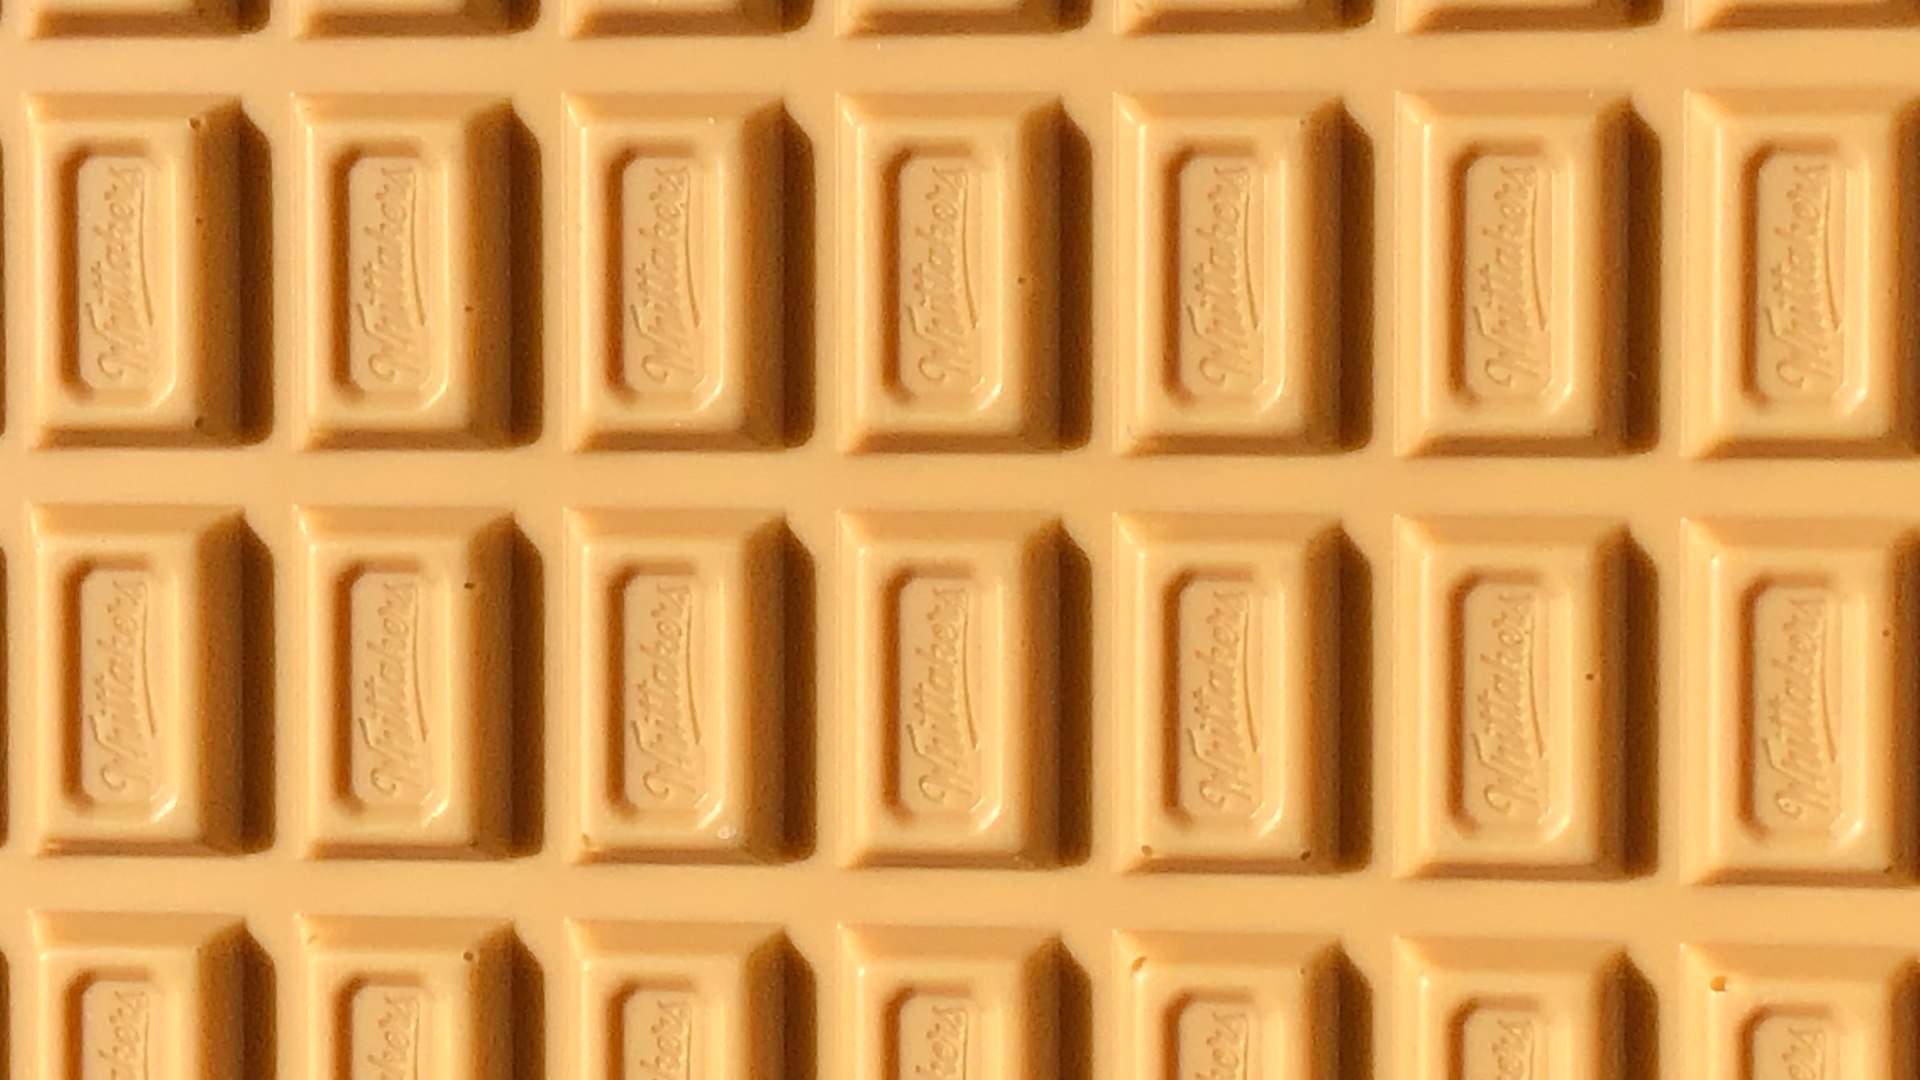 Whittaker's Is Dropping a New Caramelised White Chocolate Block Called 'Blondie-licious' Next Week